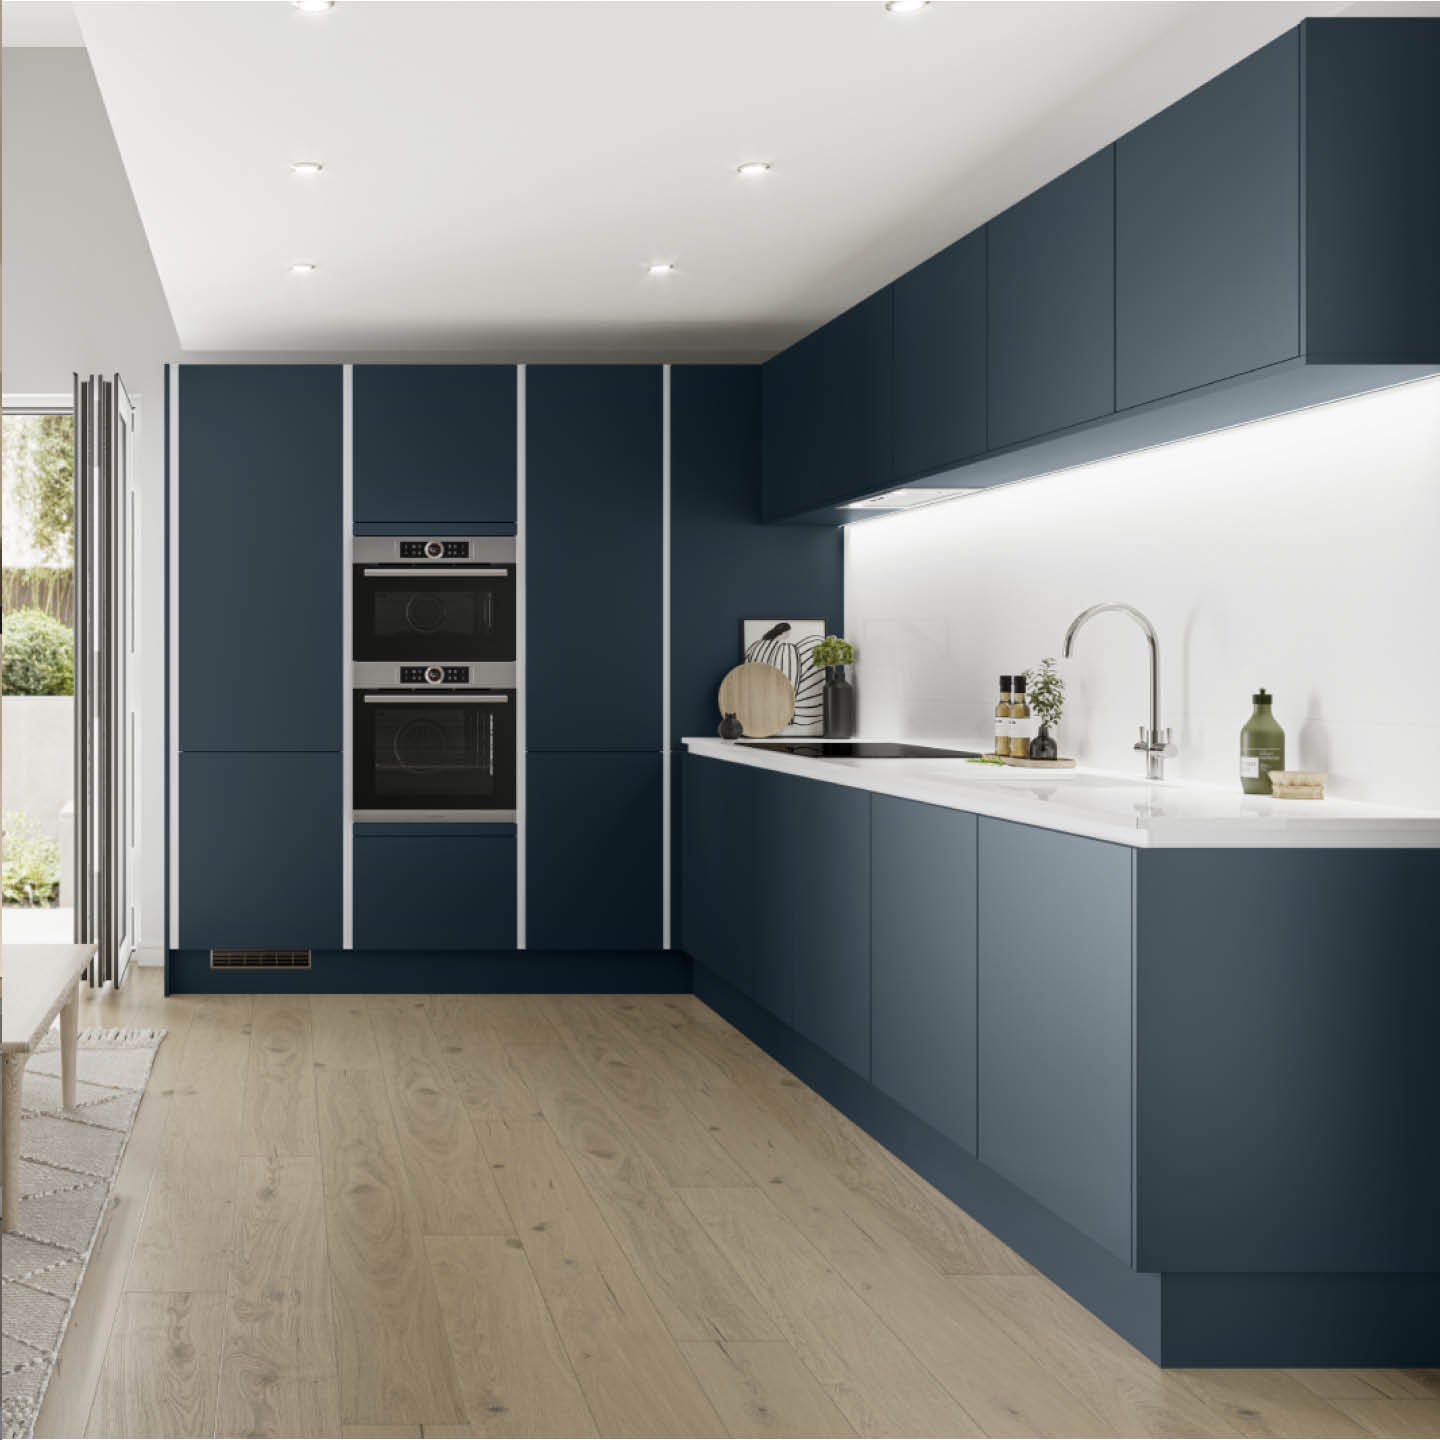 Colour Combination Trends For Your Kitchens